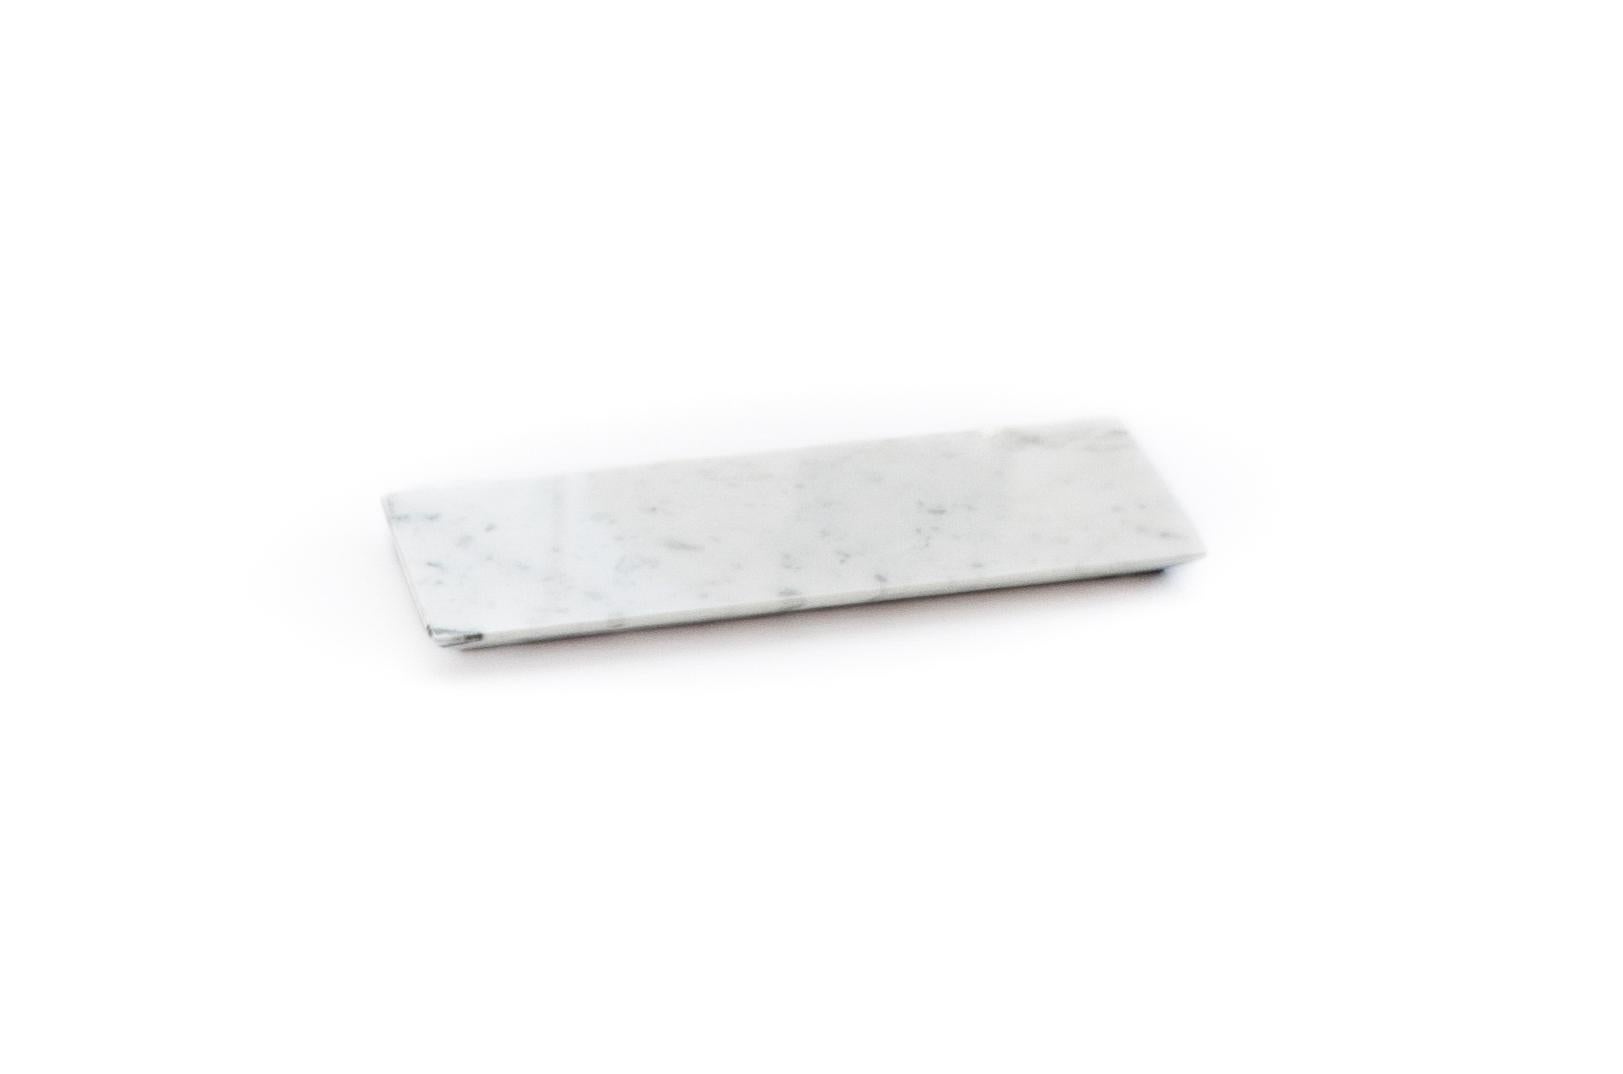 Hand-Crafted Set of 3 Canapè / Cheese Plates in White Carrara Marble